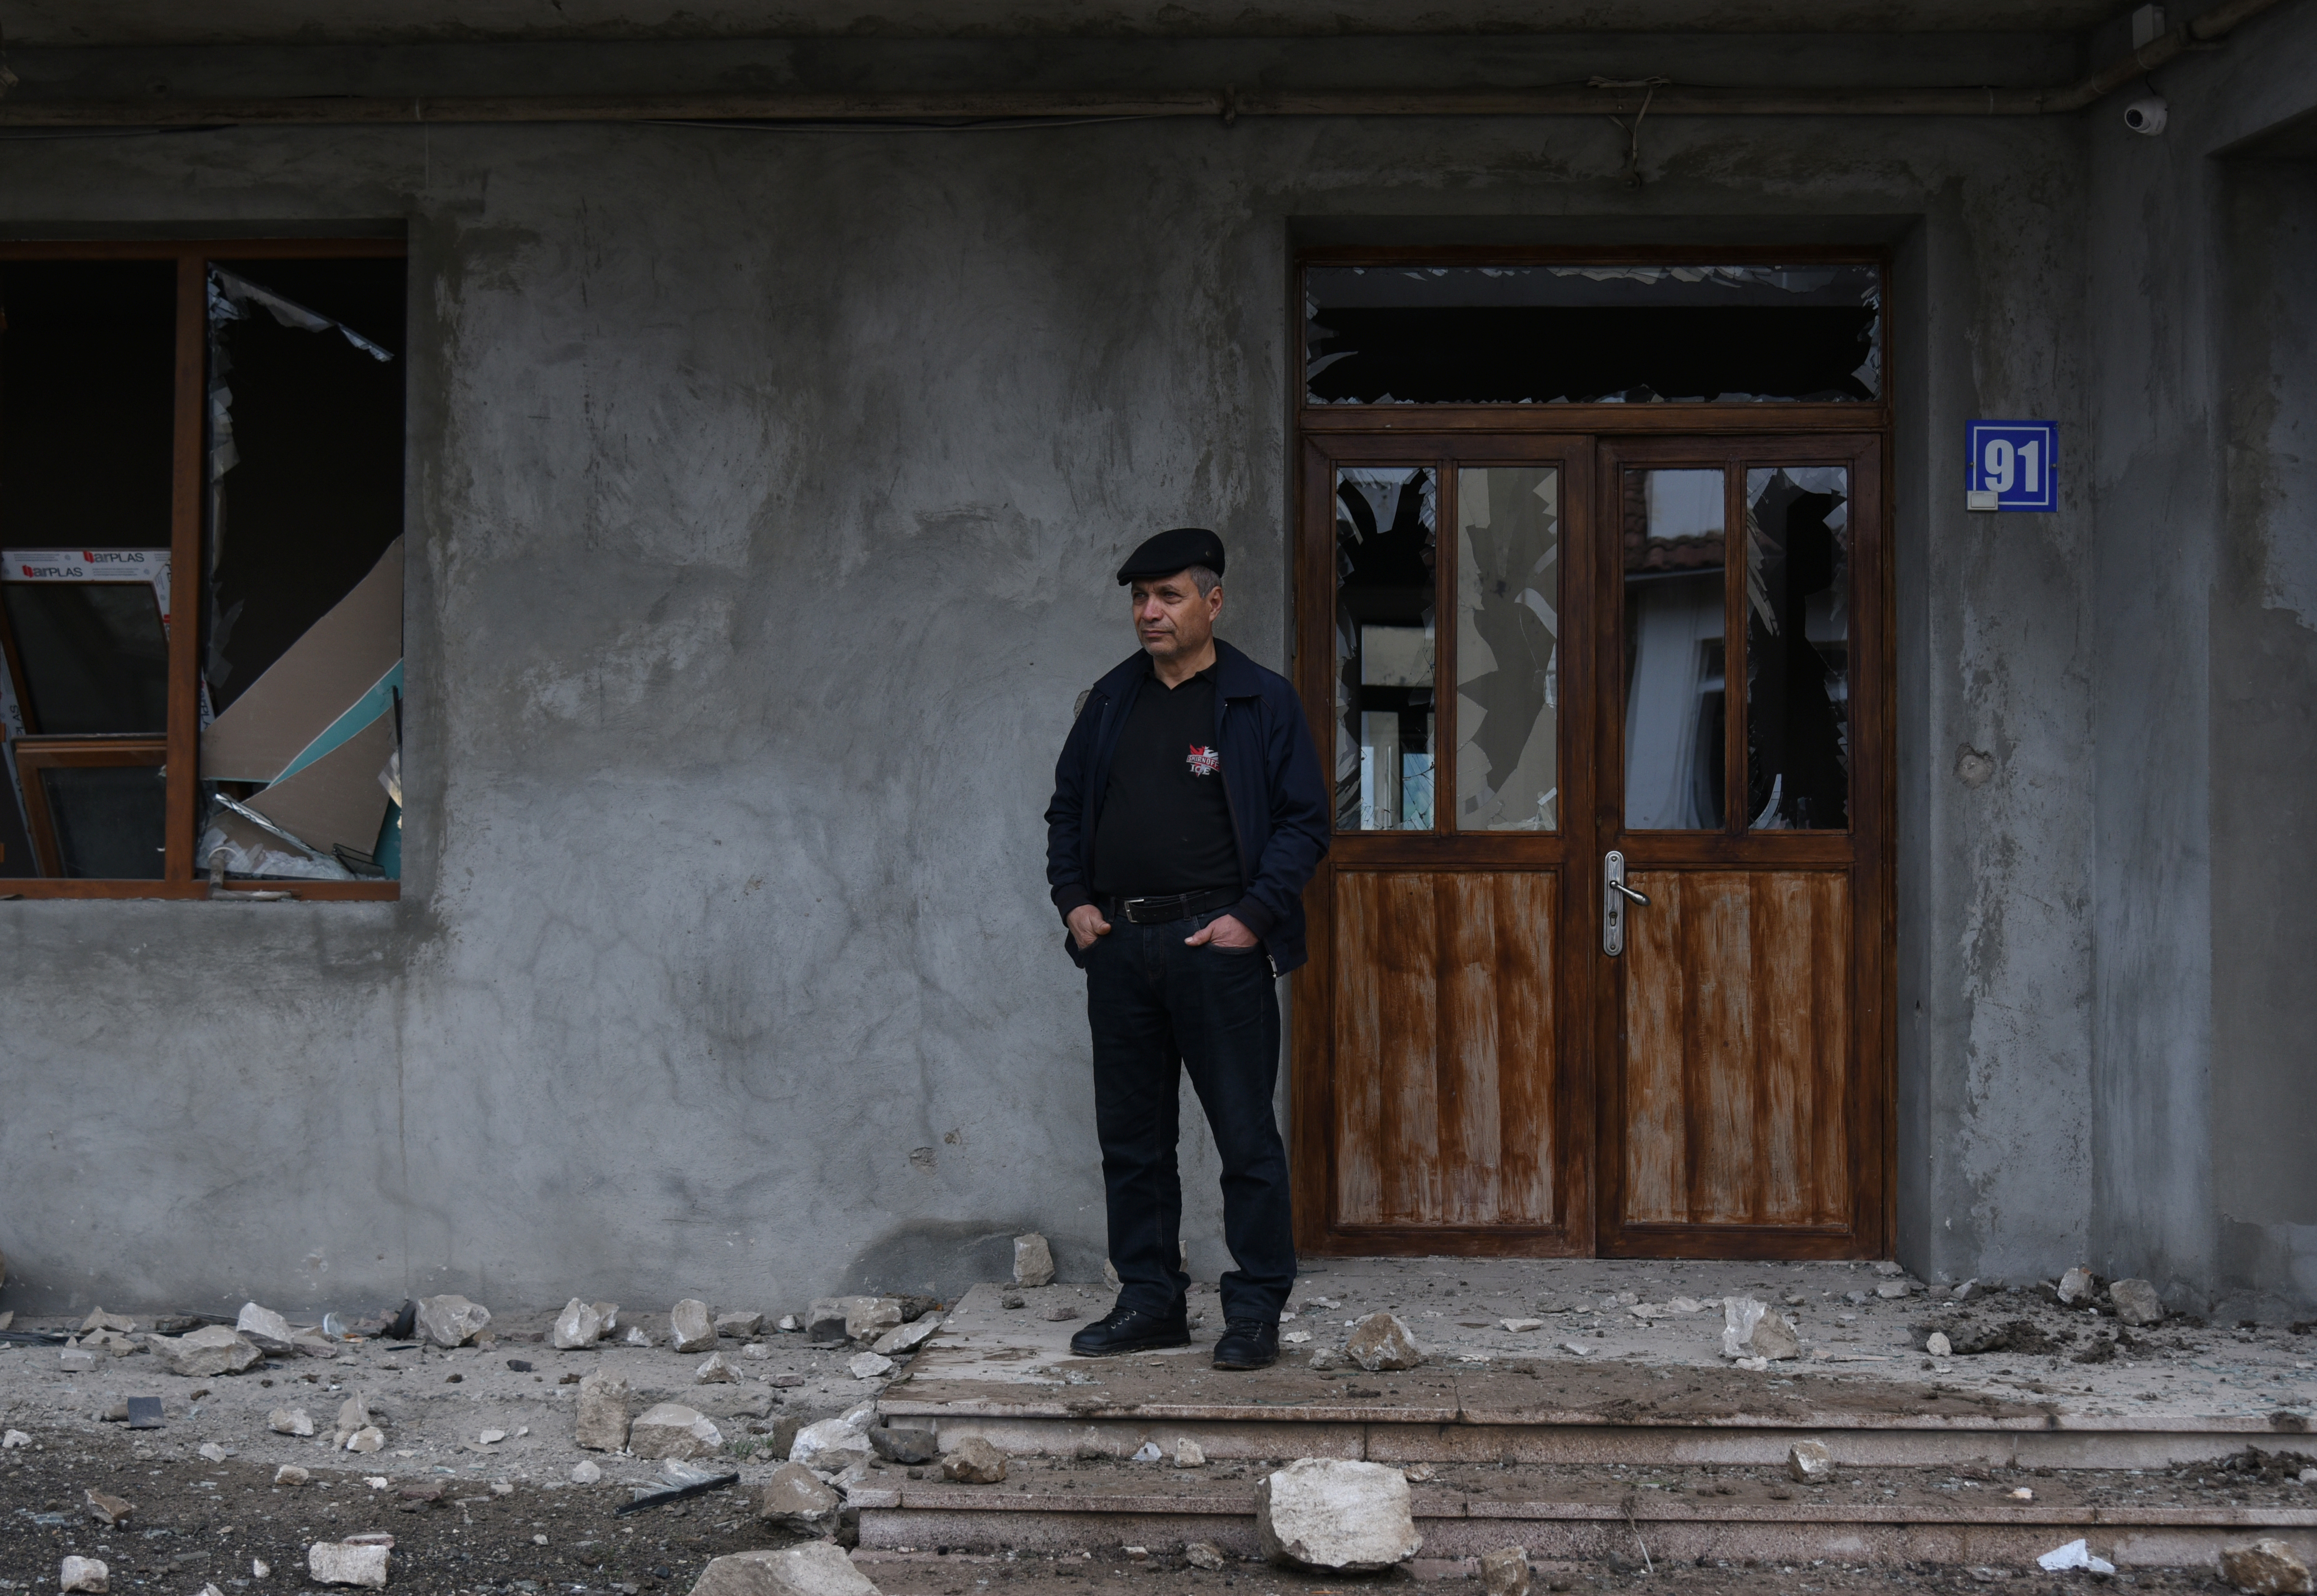 A local resident stands next to a building damaged by recent shelling during a military conflict over the breakaway region of Nagorno-Karabakh, in Stepanakert October 8, 2020. David Ghahramanyan/NKR InfoCenter/PAN Photo/Handout via REUTERS ATTENTION EDITORS - THIS IMAGE HAS BEEN SUPPLIED BY A THIRD PARTY. MANDATORY CREDIT.